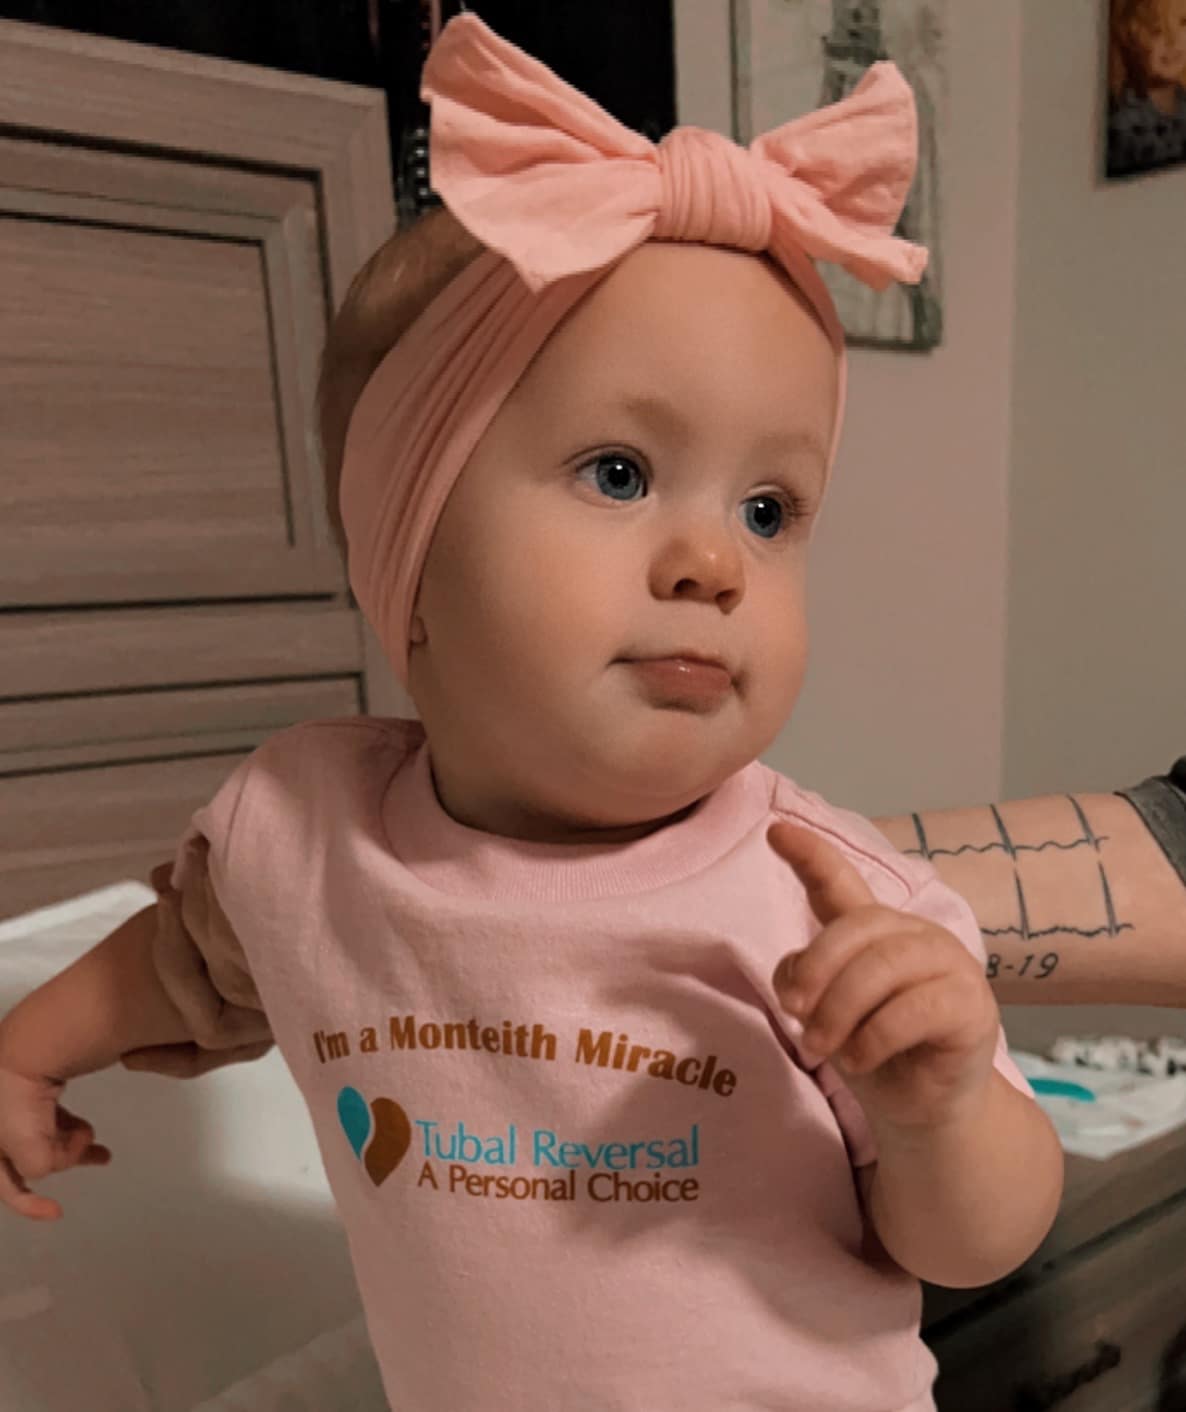 monteith-miralce-tubal-reversal-baby-from-morganton-nc-fits-shirt